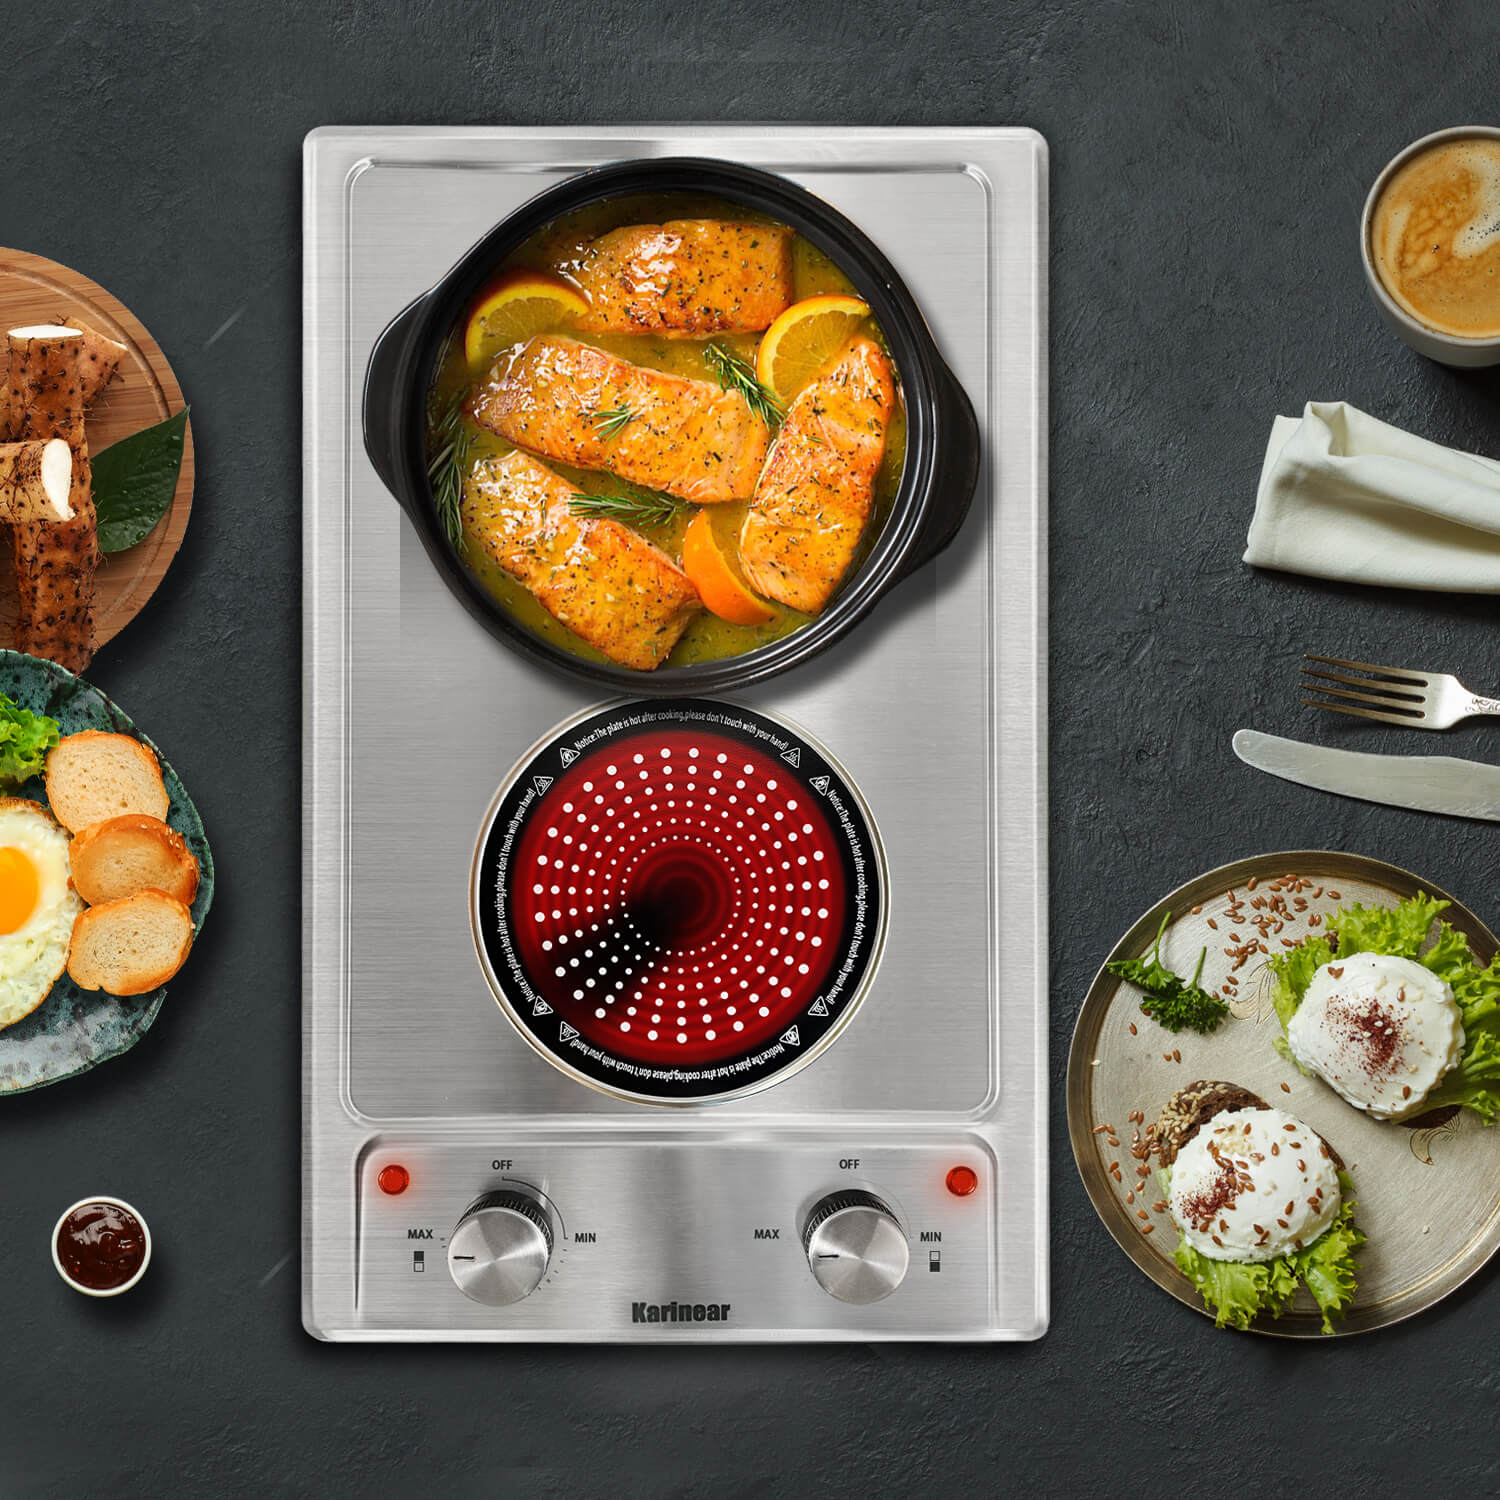 The stainless steel electric cooktop is equipped with 2 cooking zones at 120V and 2000W, with many power level setting and two knobs to control the burners, which makes cooking especially easy. Easy to clean and operate helps a family cook efficiently.